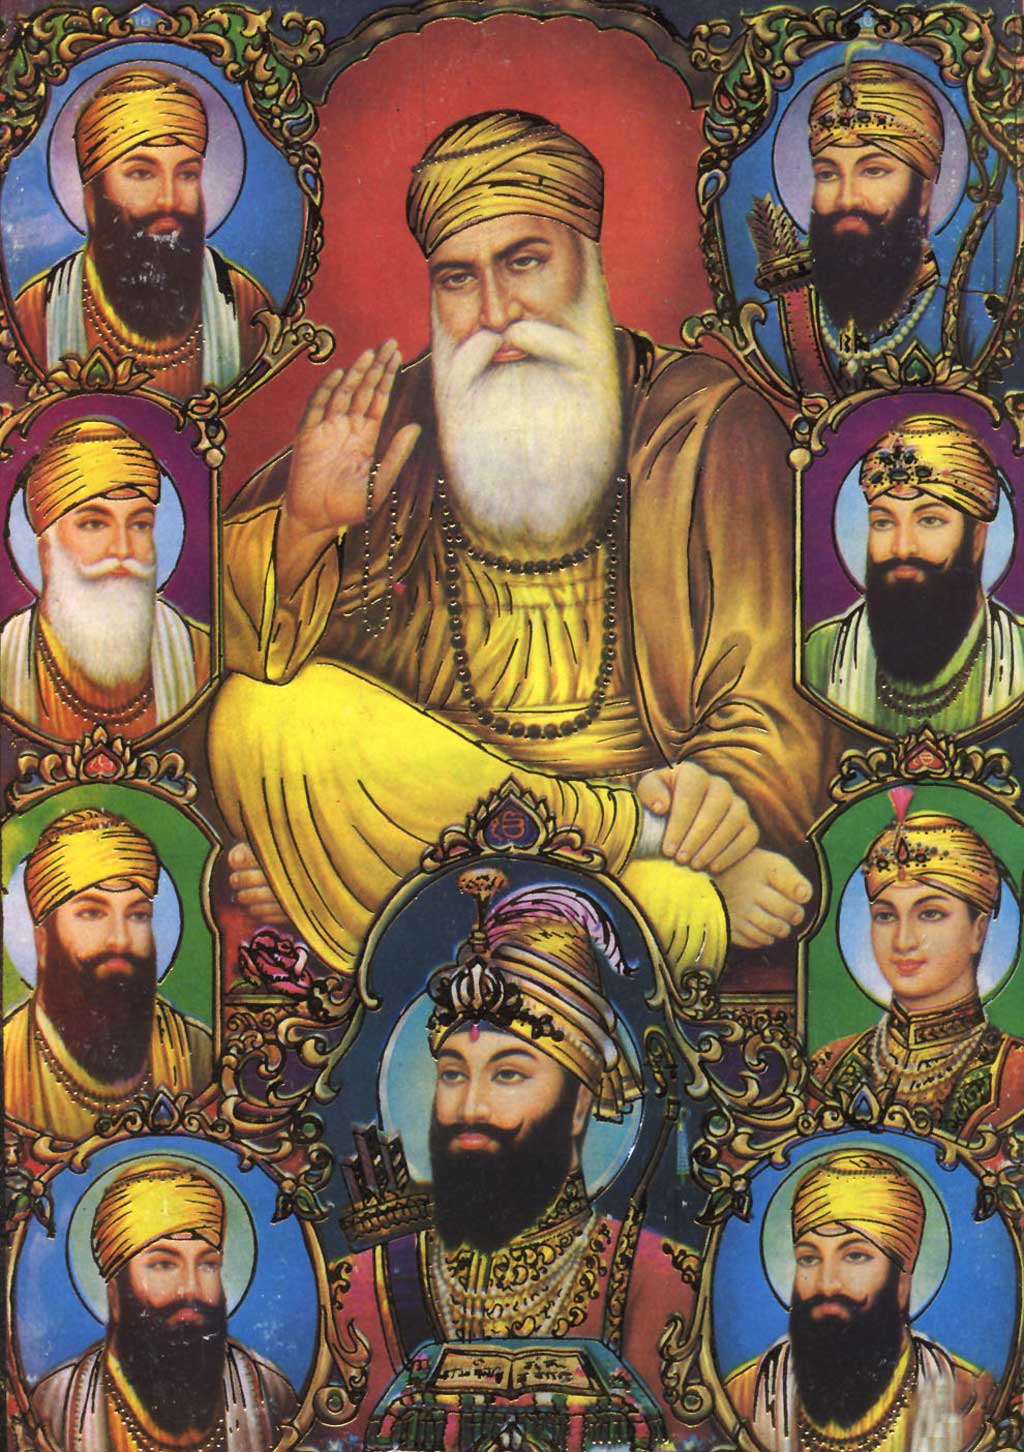 GODS CLIPARTS AND IMAGES: SIKH GURU